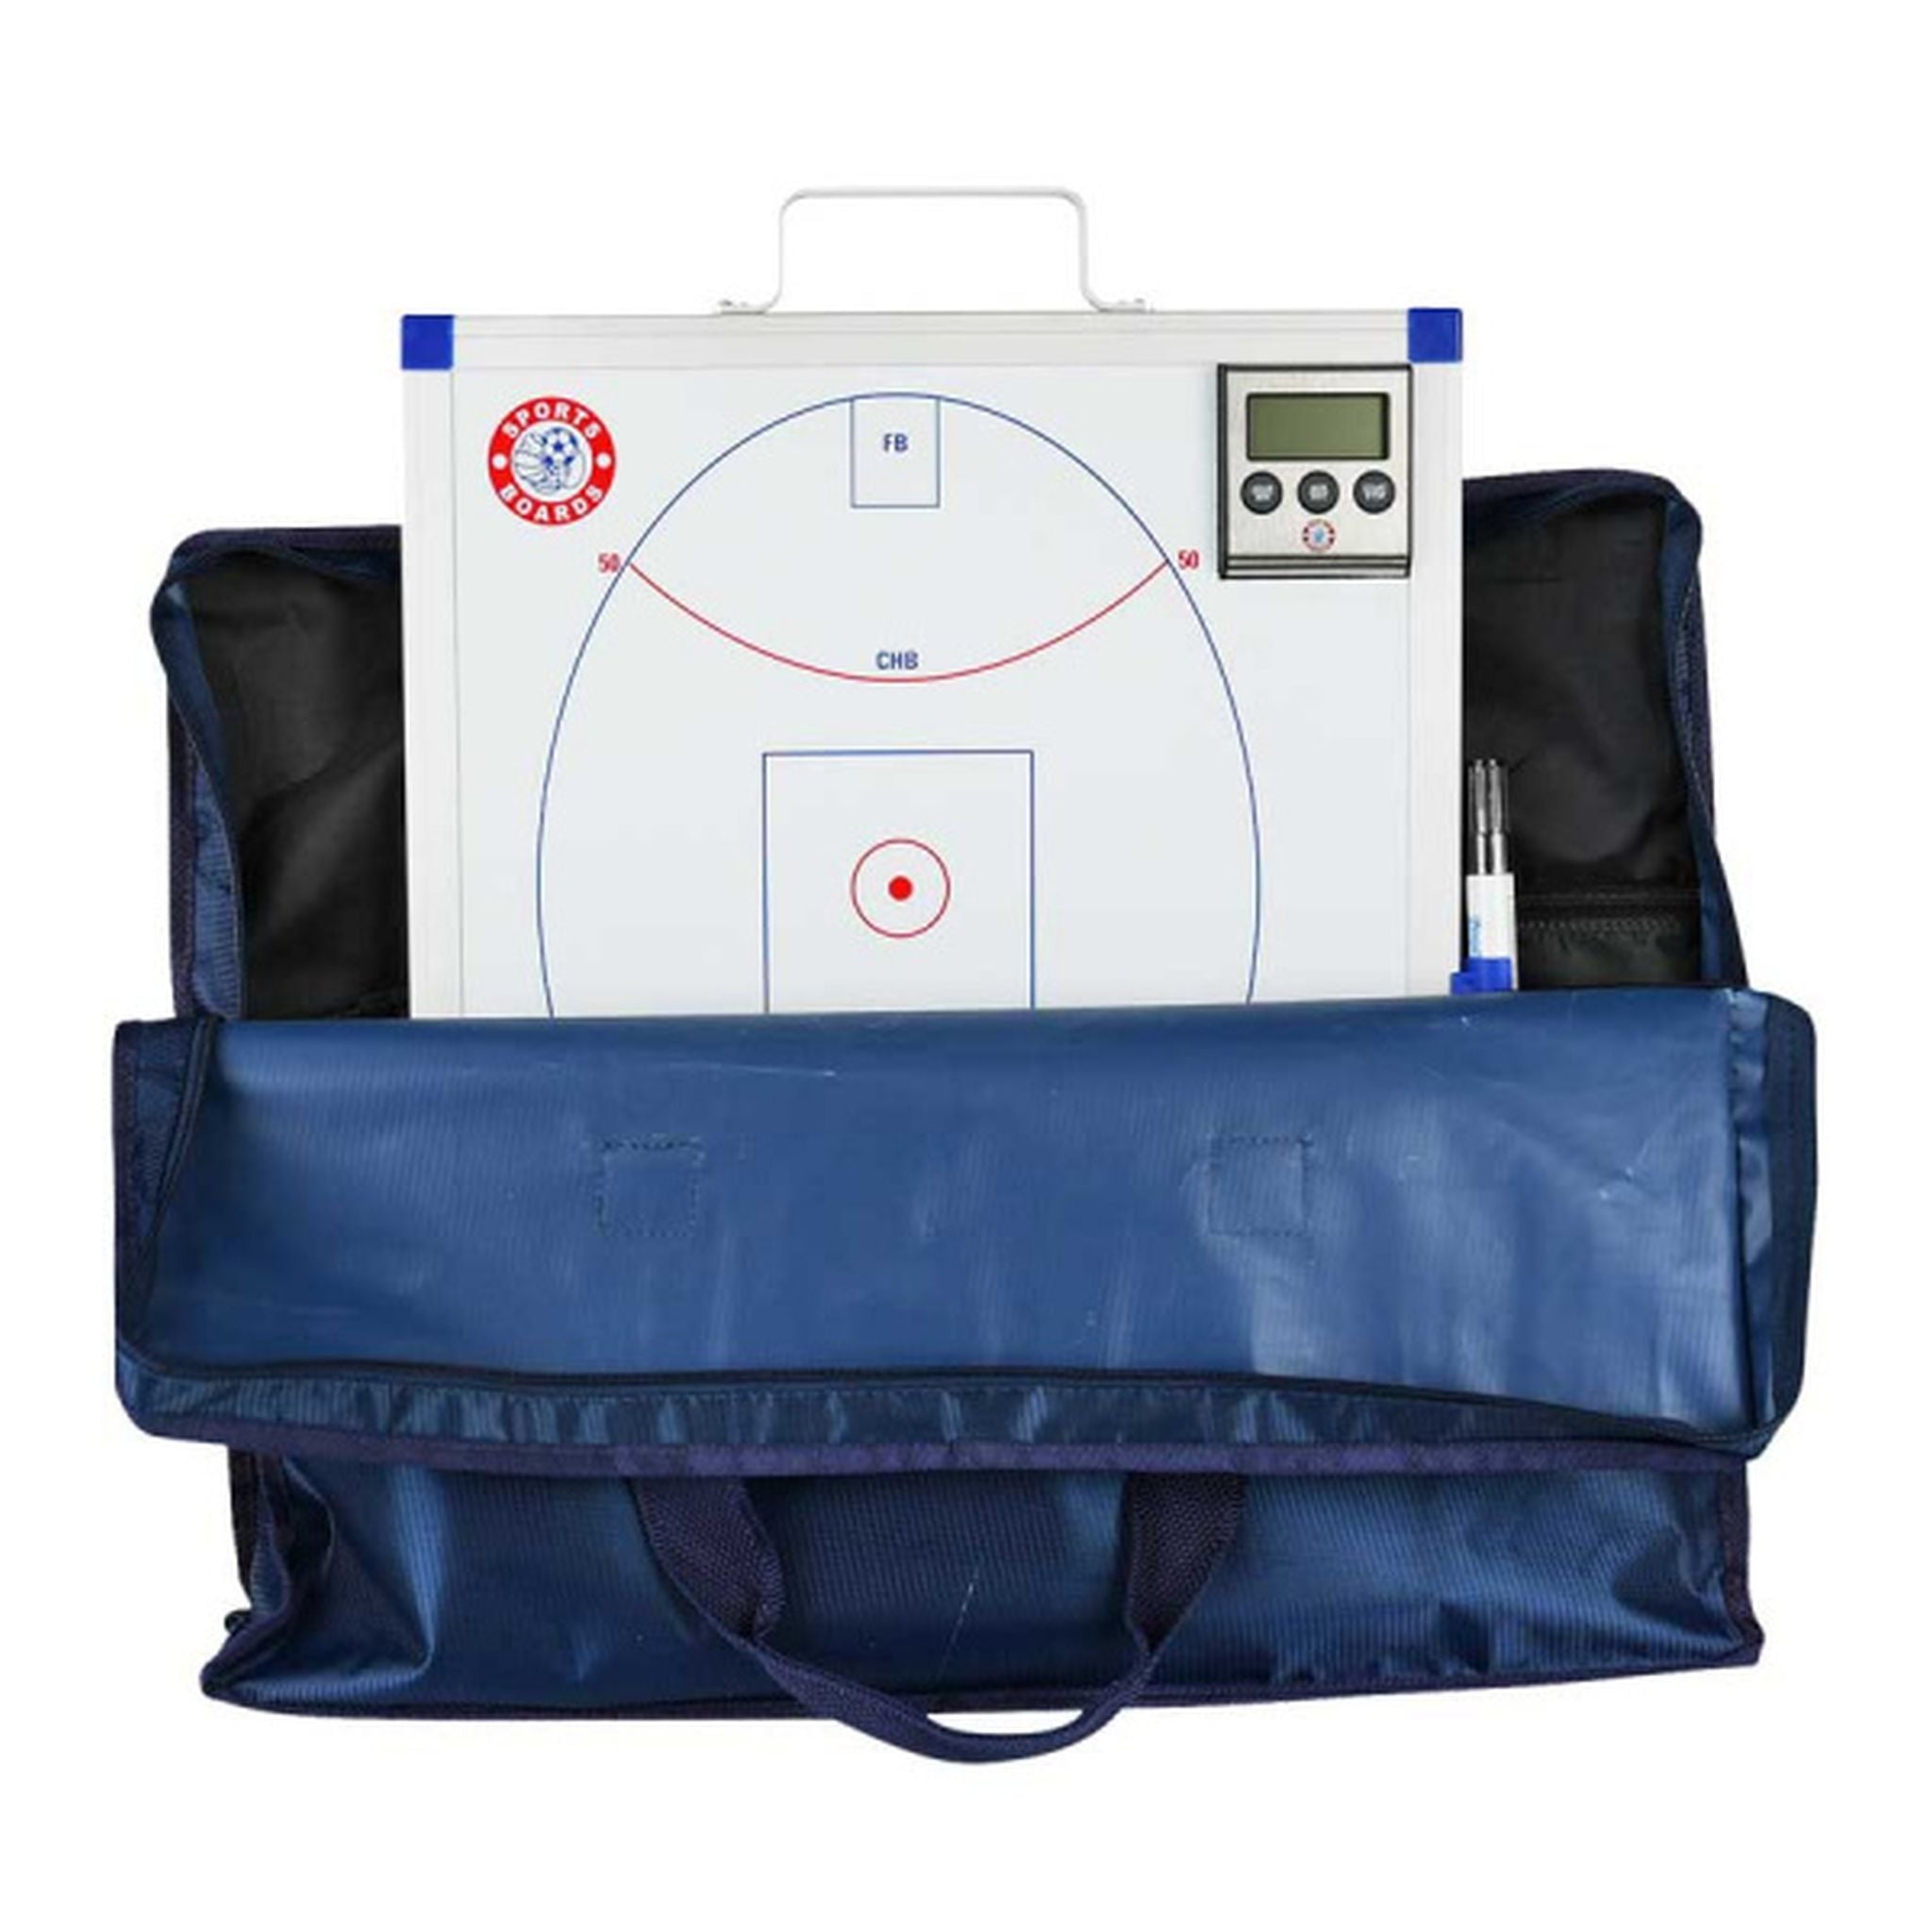 Sports Boards Coaches Small Carry Bag